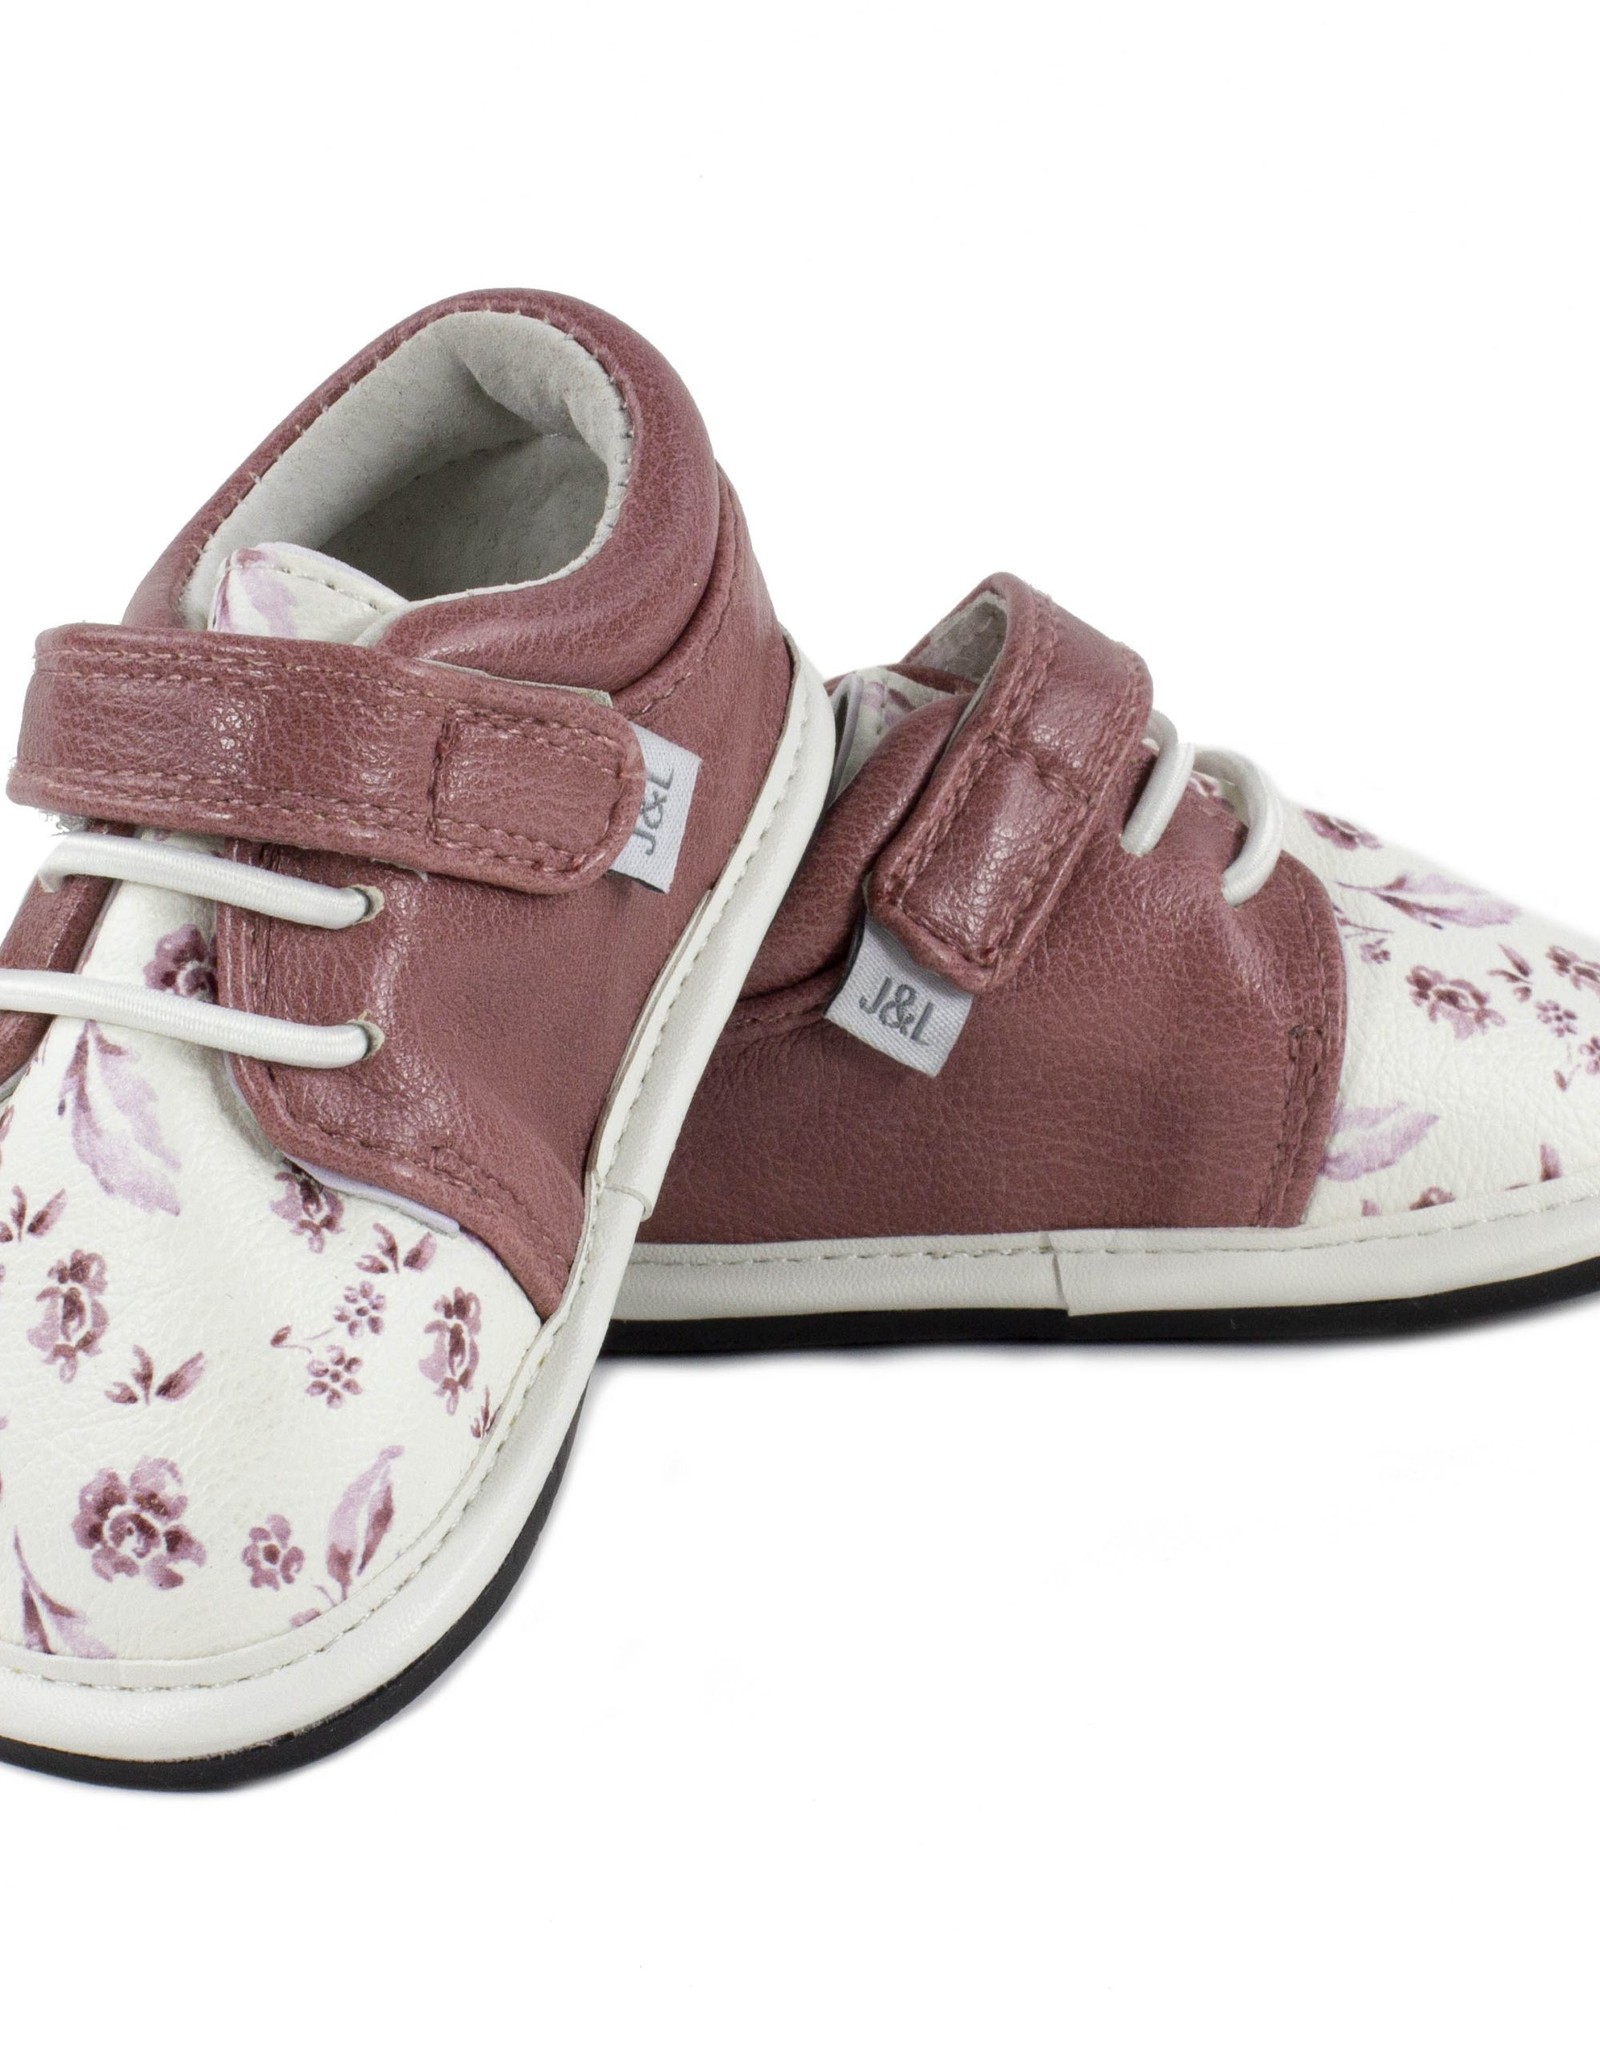 Jack & Lily SP22 Nina Floral My Shoes